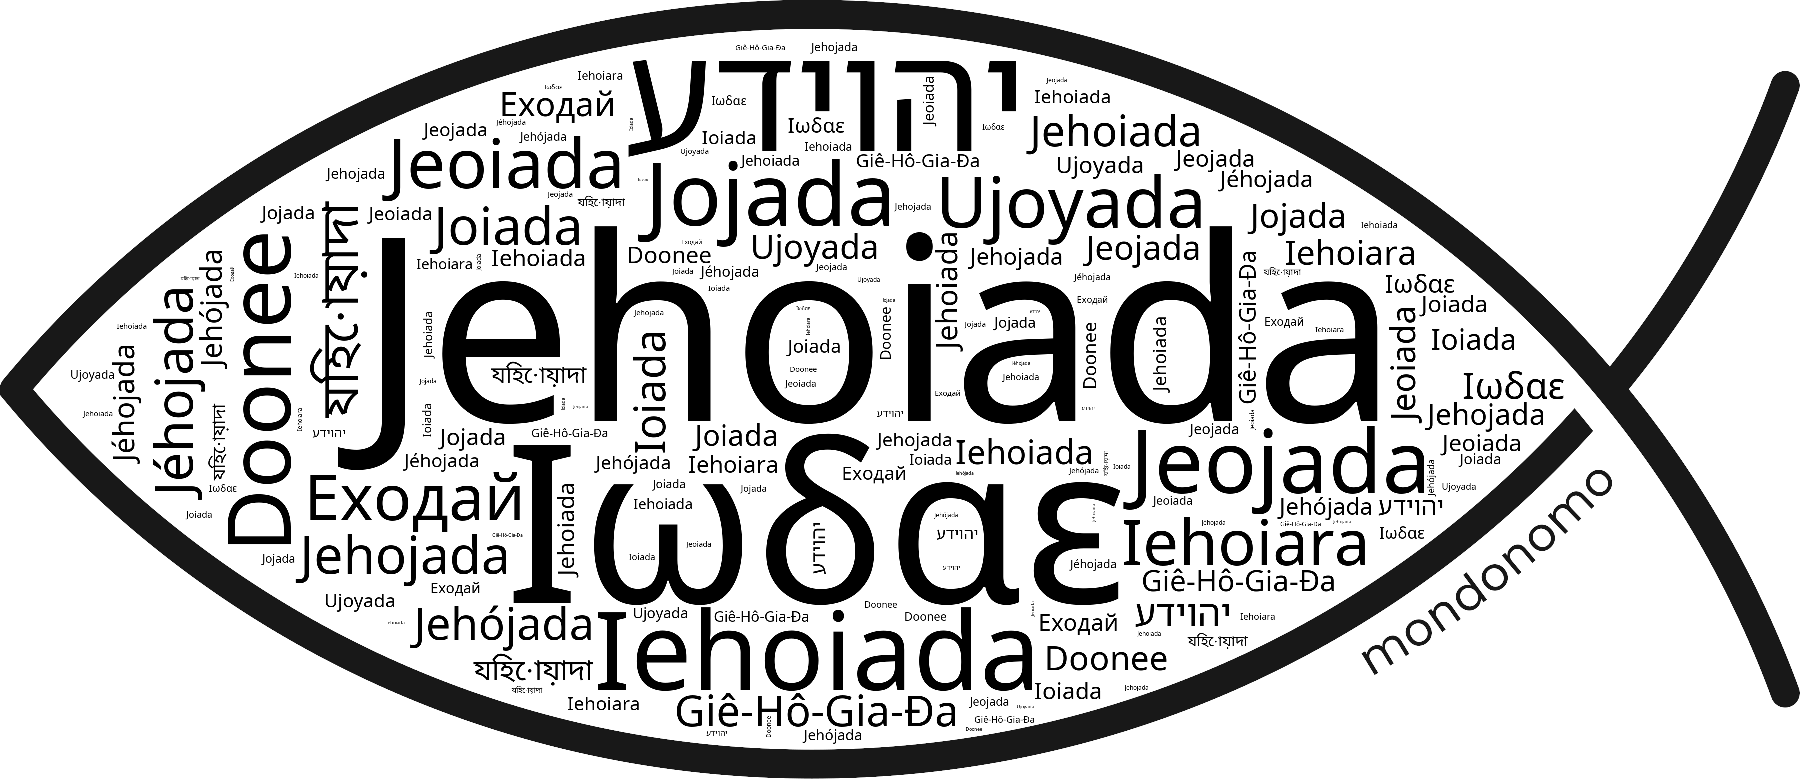 Name Jehoiada in the world's Bibles